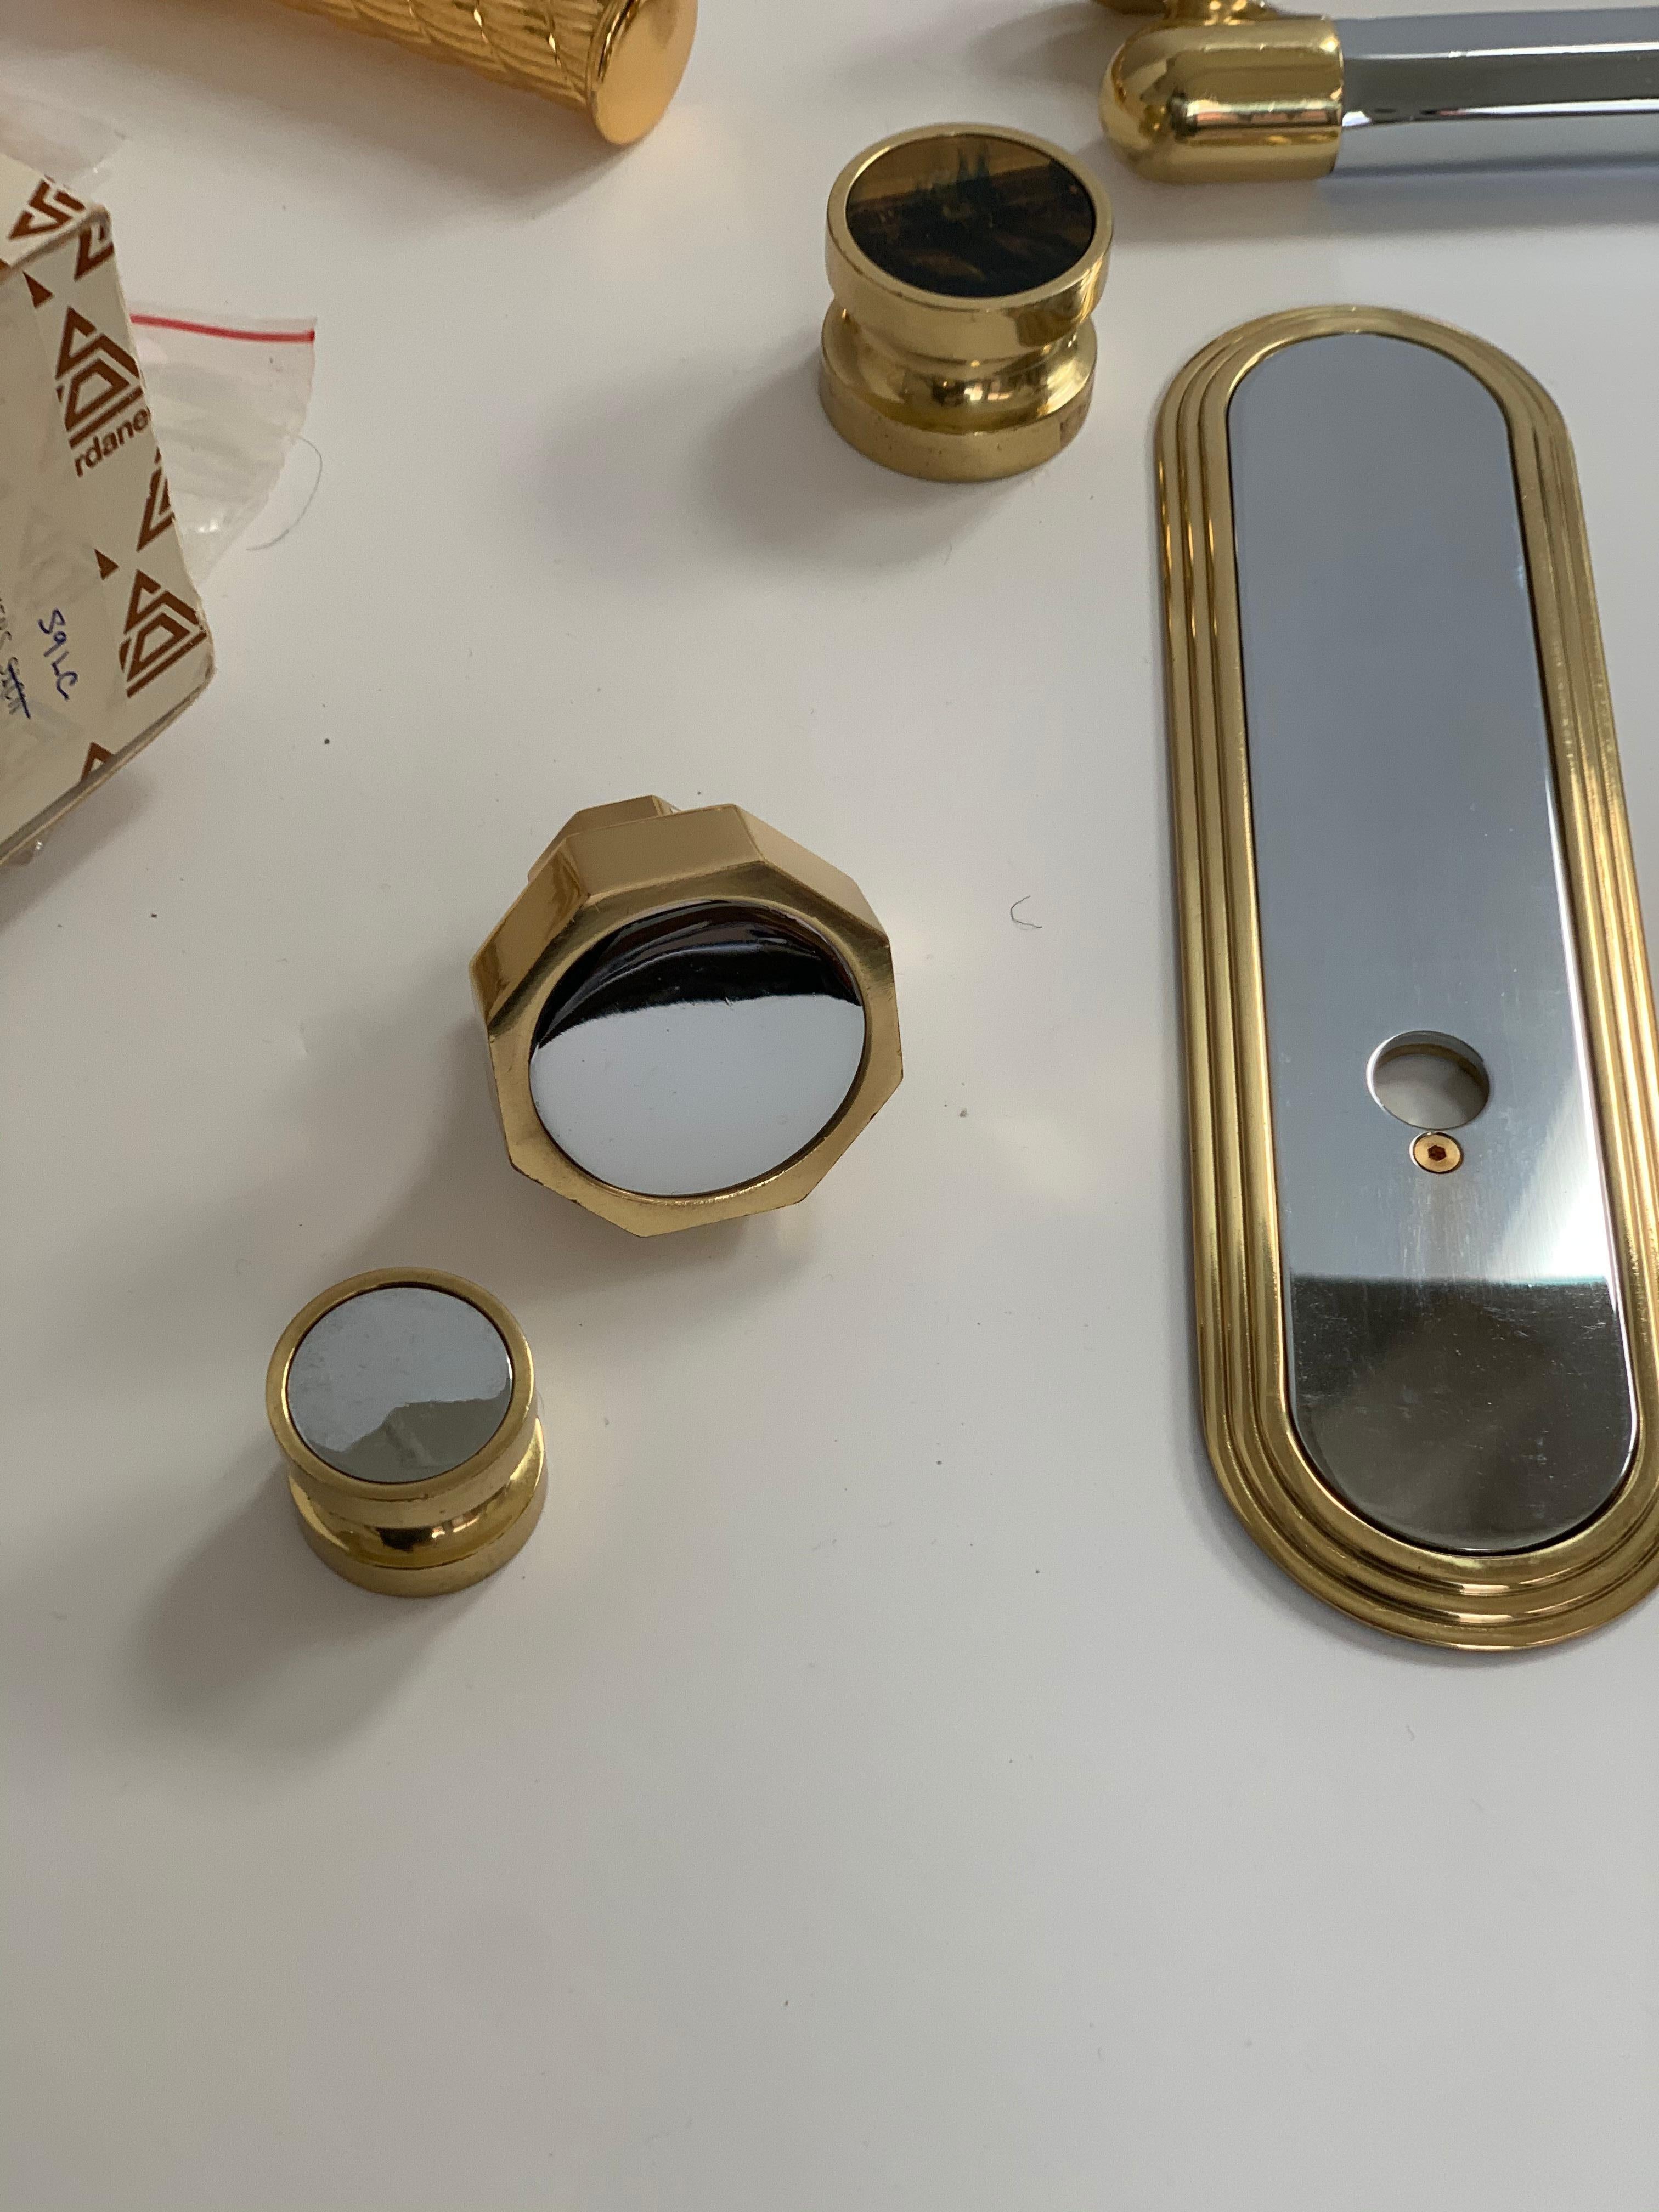 Polished gold and chromed bronze octagonal door knob and plate, Serdaneli Paris. Prestige collection. 24-karat gold-clad cast bronze. Gorgeous, substantial set. For over 45 years, Serdaneli, the 